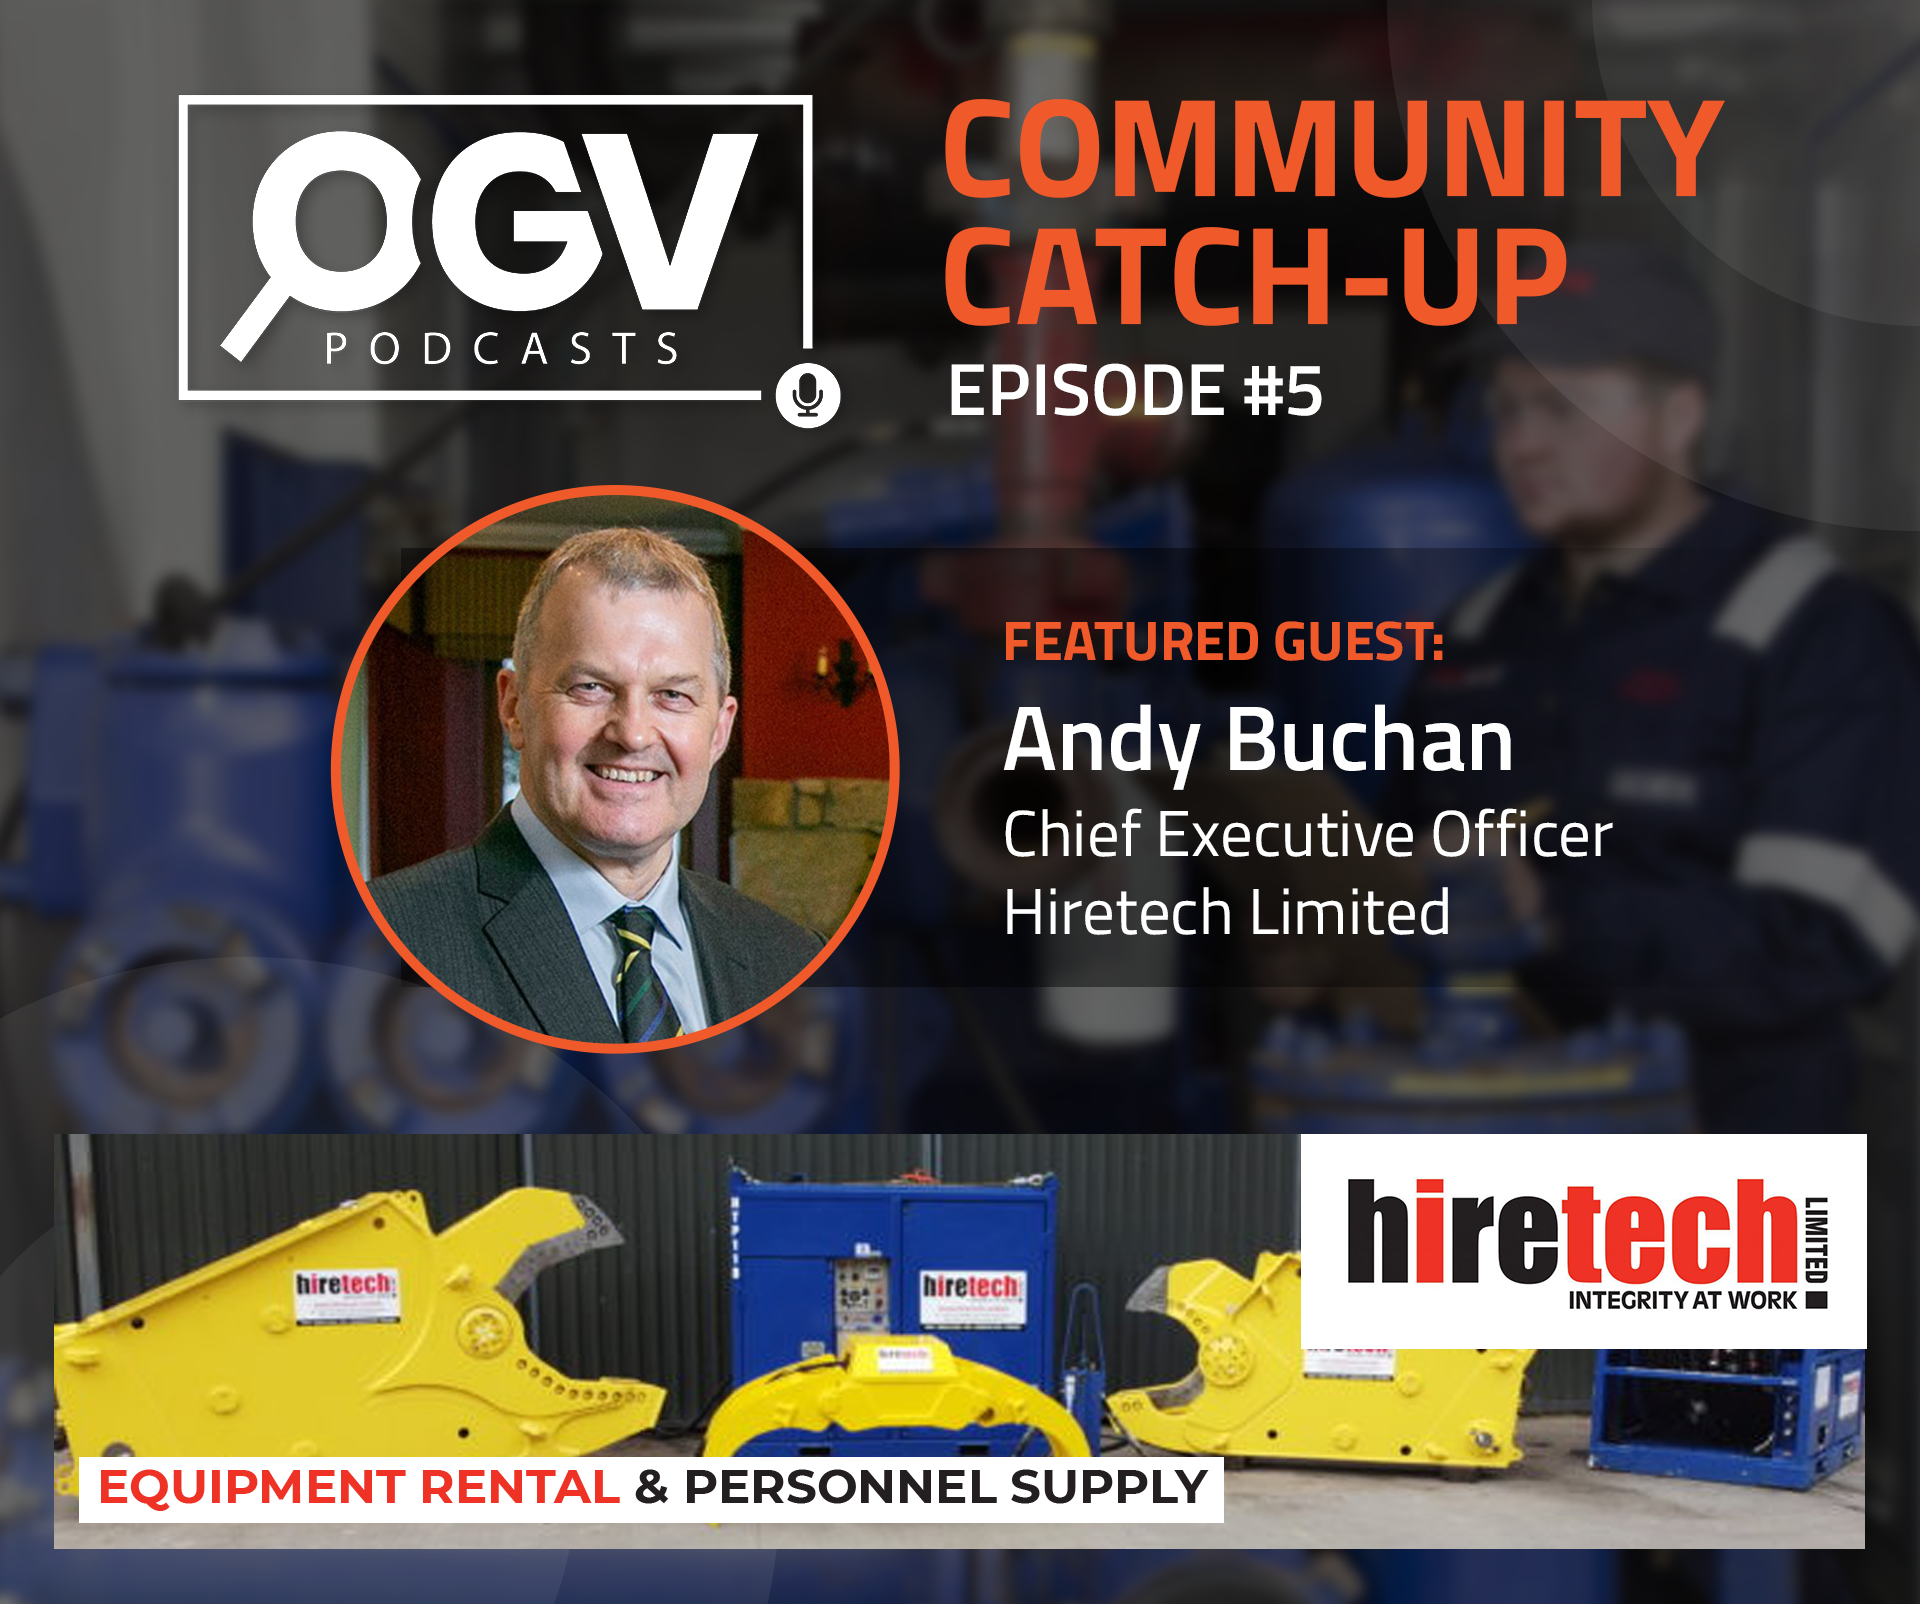 OGV Community Catch-up with Andy Buchan from Hiretech Limited